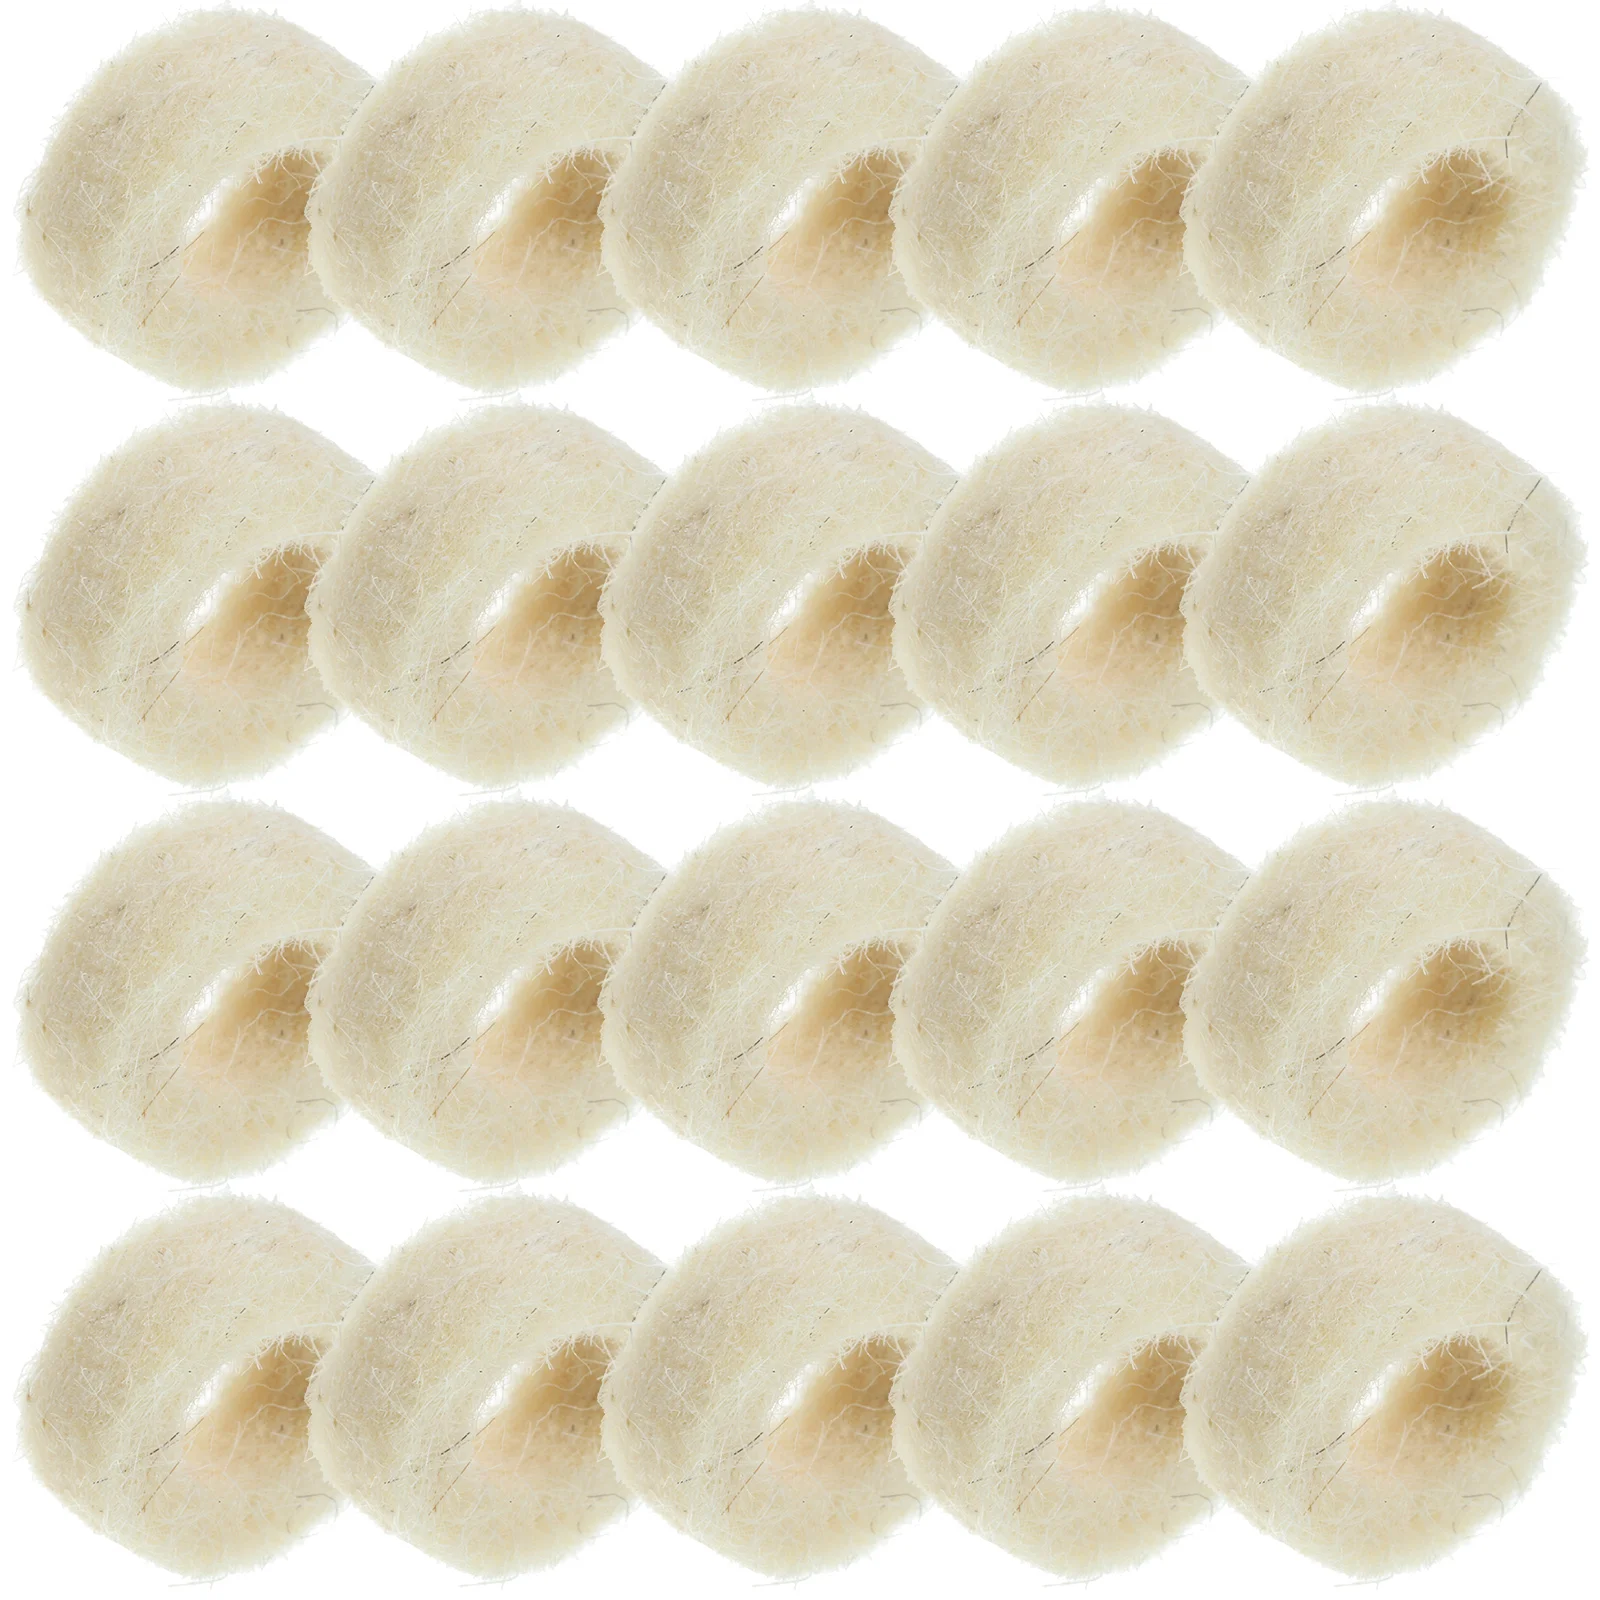 

100 Pcs Industrial High Density Wool Felt Sealing Gasket Mechanical Oil Absorbing Washer Washers for Screws Replacement Bolts